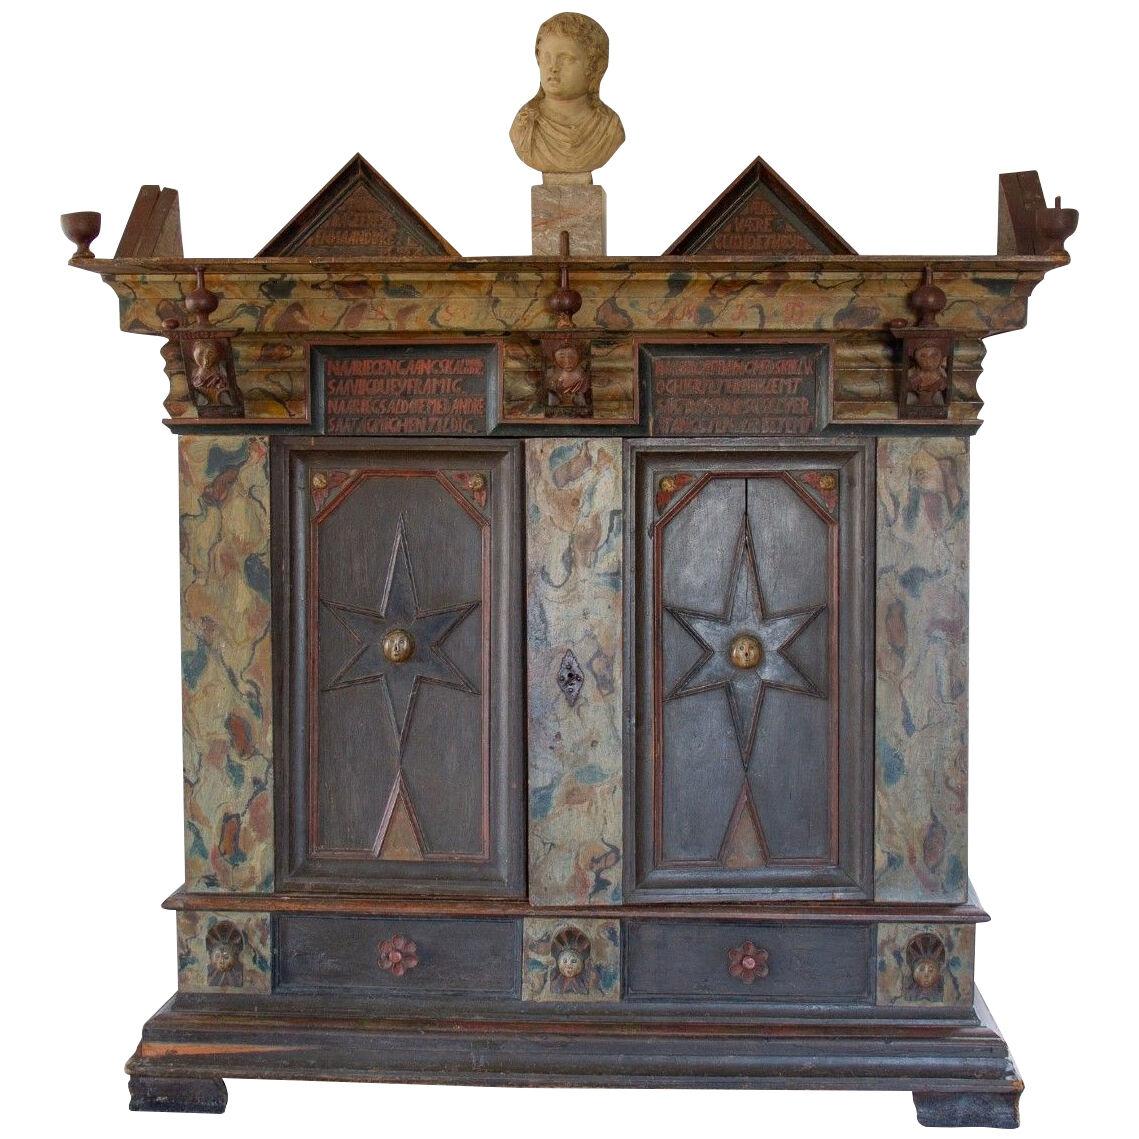 A Large Danish 18th Century Painted Cabinet